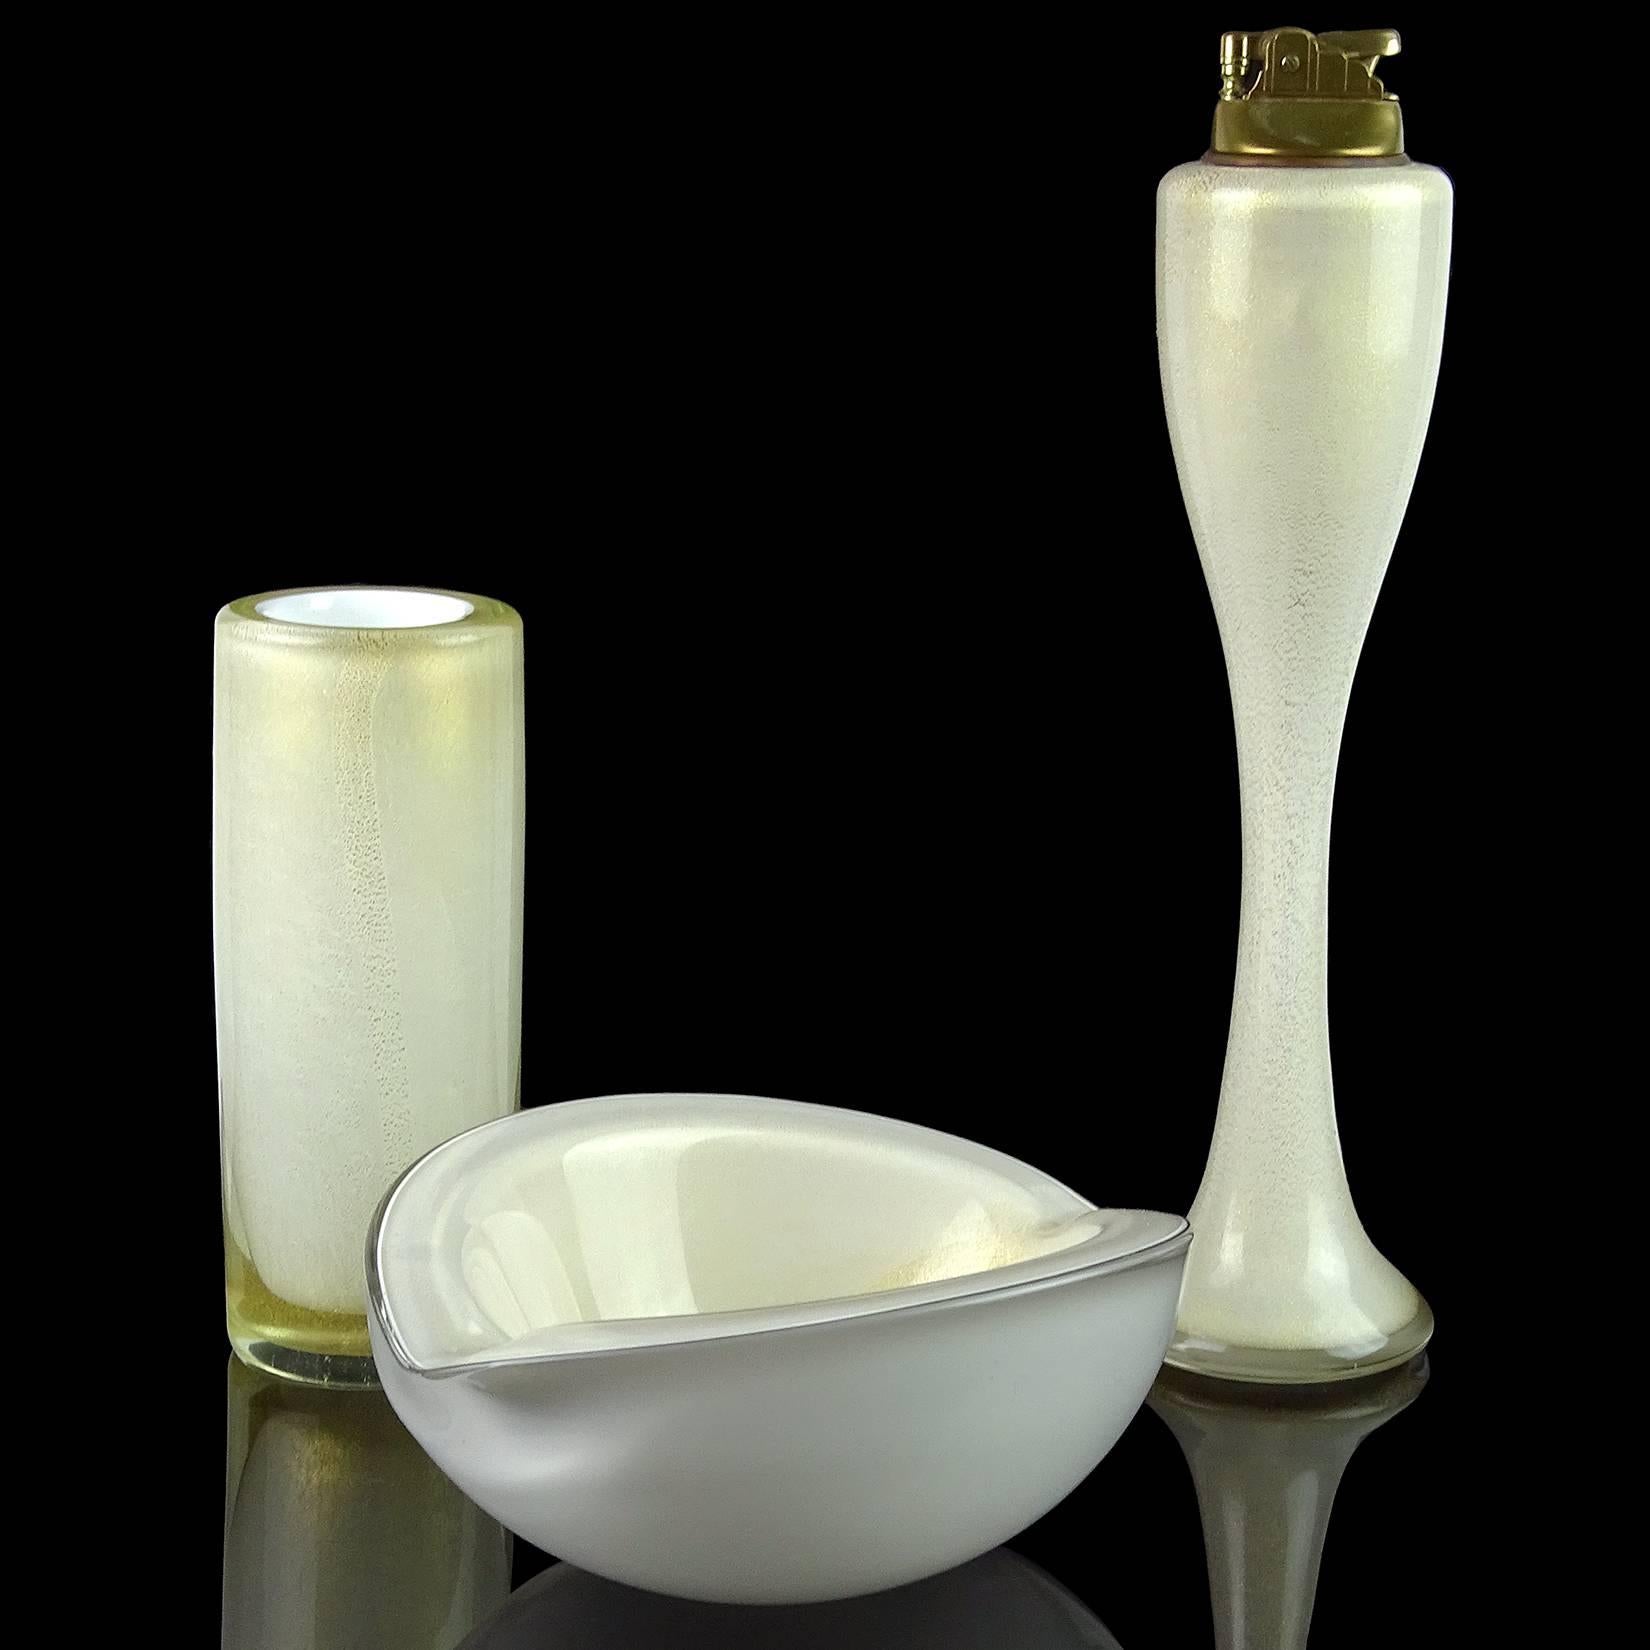 Beautiful Murano handblown pure white with gold flecks art glass bowl, flower vase, and tall lighter set. Documented to designer Alfredo Barbini, circa 1950s-1960s. All three pieces are profusely covered in gold leaf. The tall lighter, in rare size